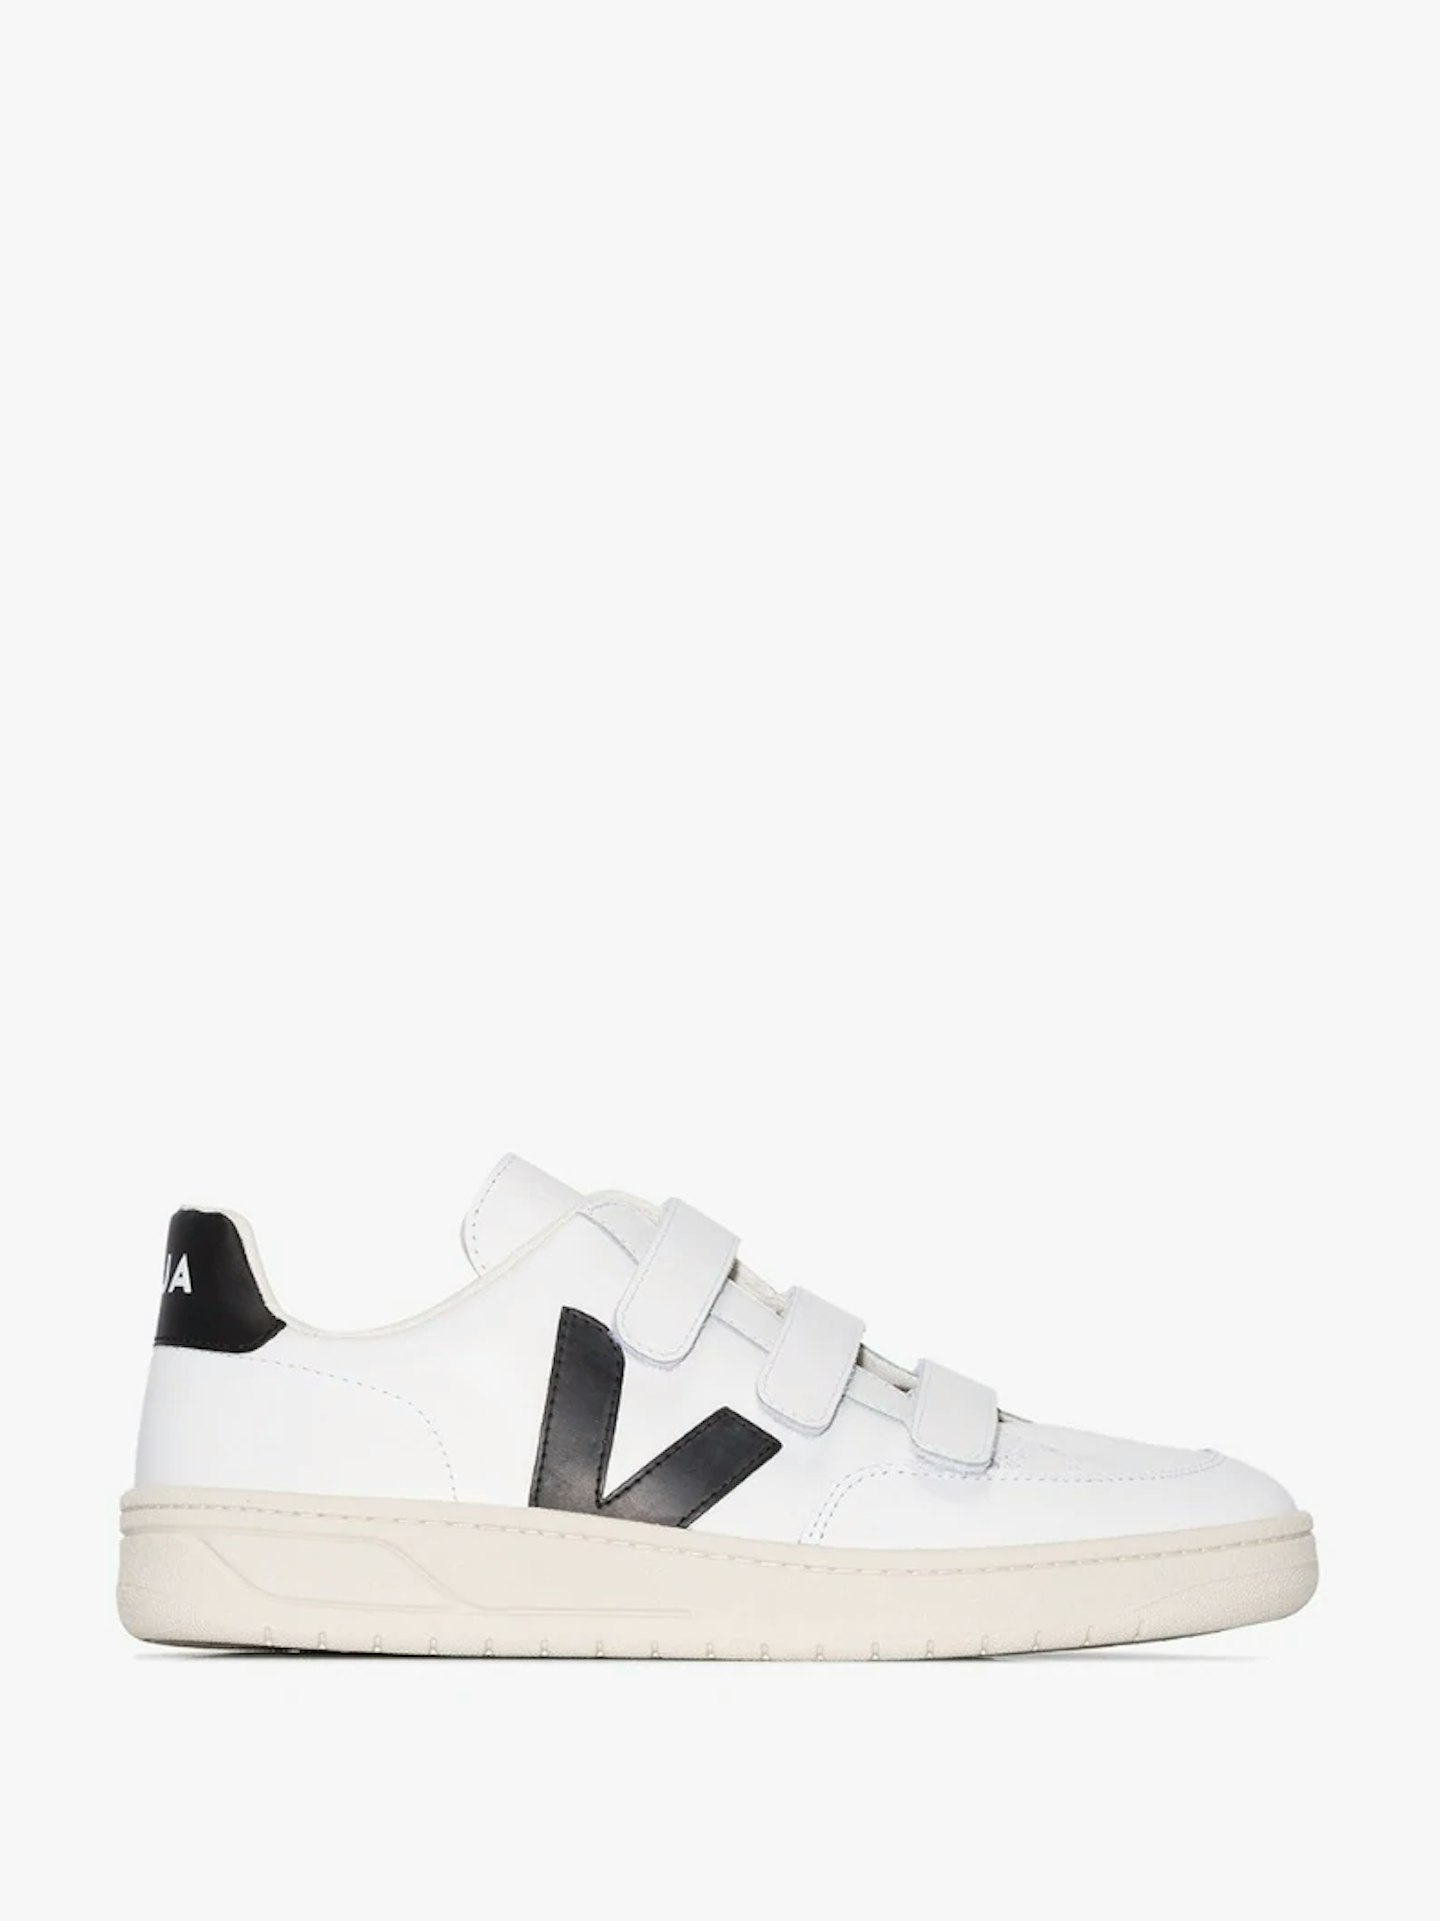 Veja, Leather Velcro Trainers, £120